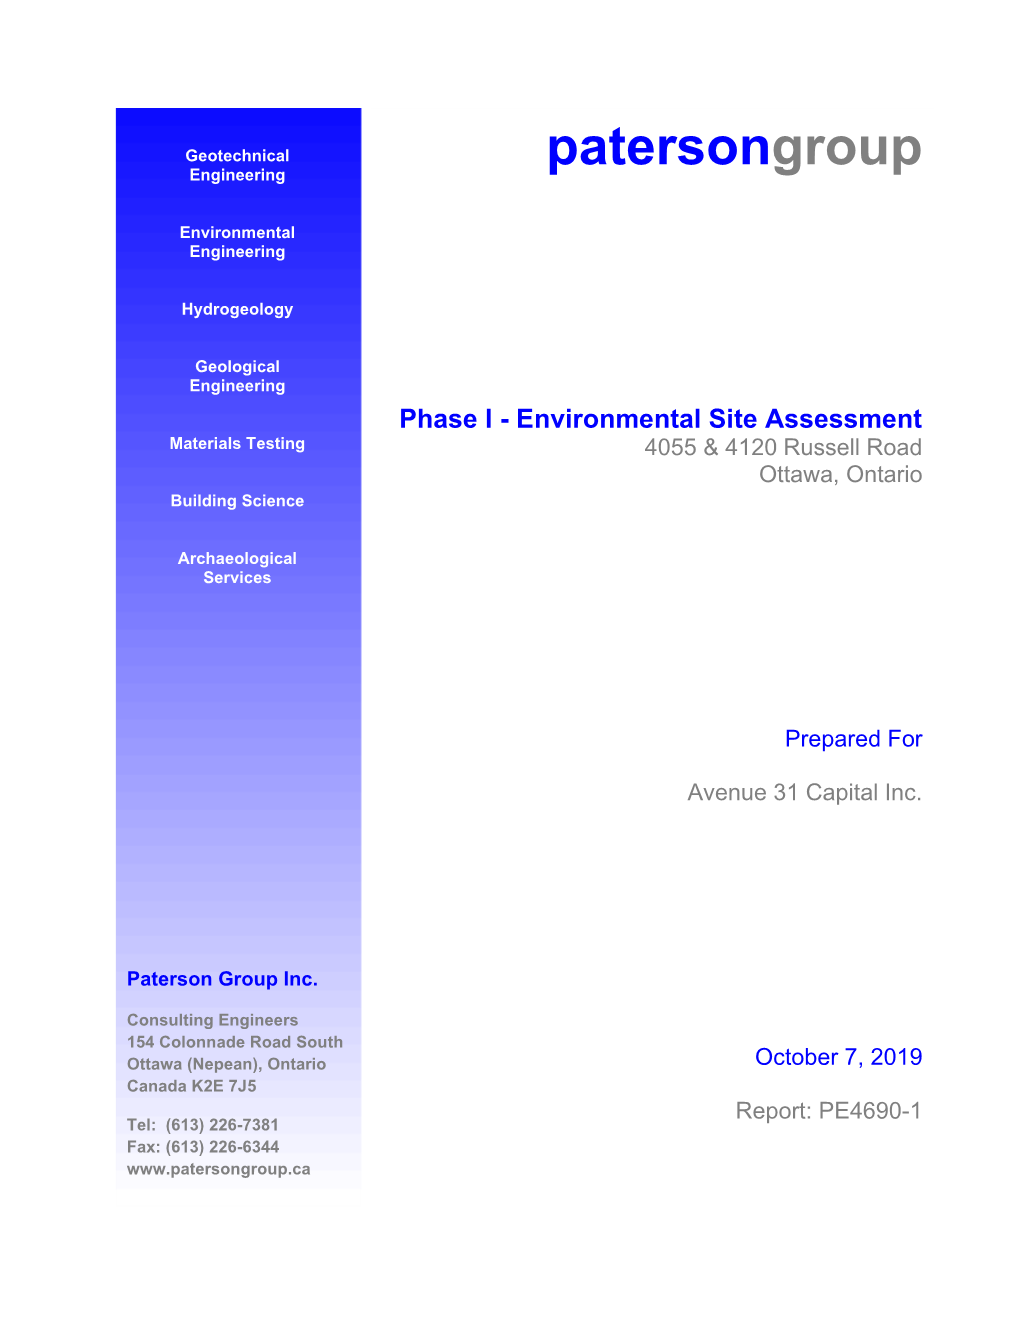 Patersongroup Phase I - Environmental Site Assessment Ottawa Kingston North Bay 4055 & 4120 Russell Road Ottawa, Ontario